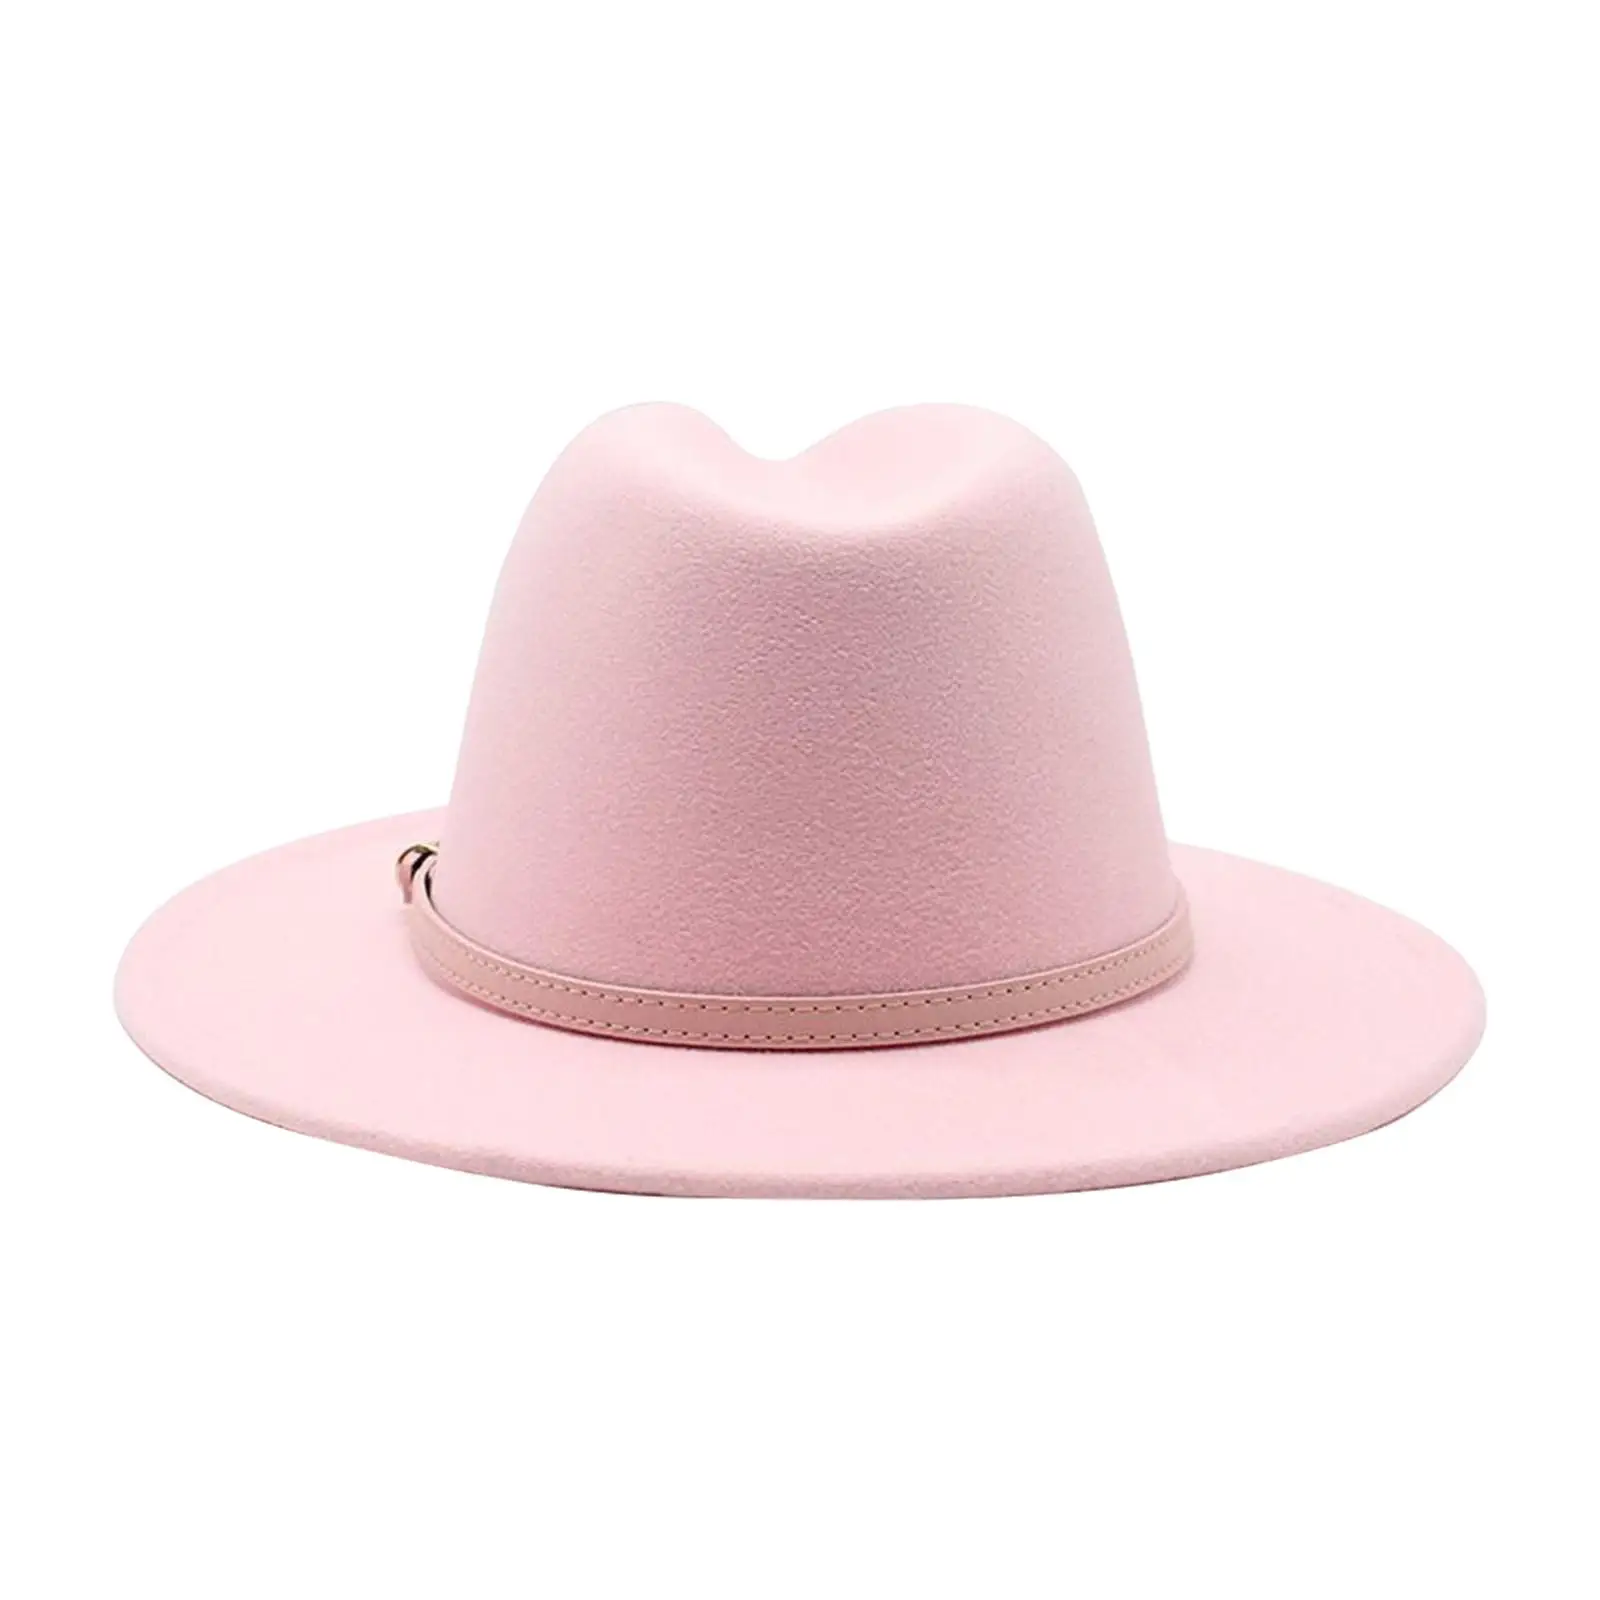 Women Fedora Hats Belt Buckle Cowgirl Cap Panama Hat for Wedding Cosplay Stage Performance